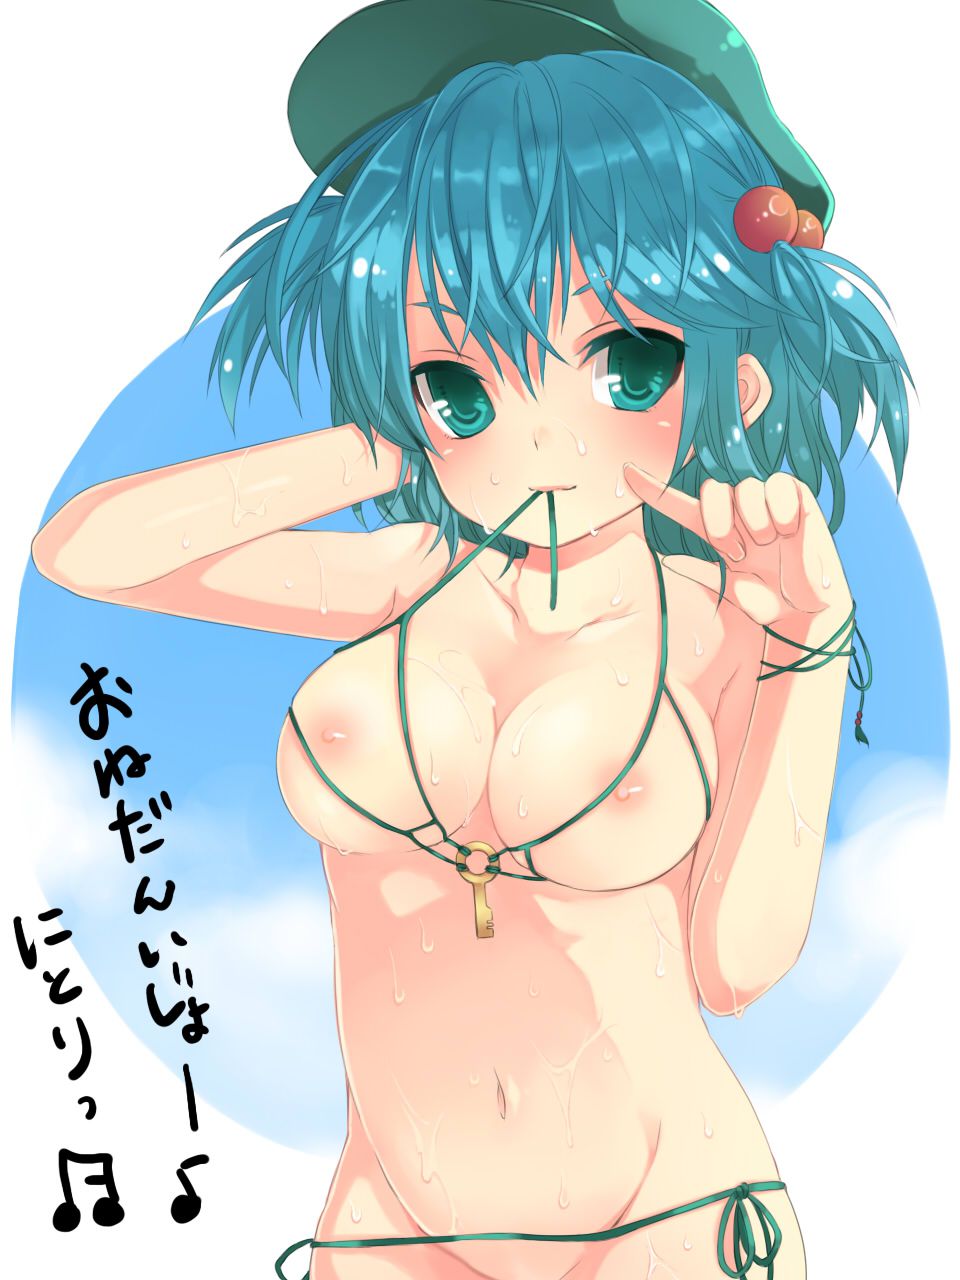 Guys love Rainbow and was breasts it's picture time vol Otaku 14